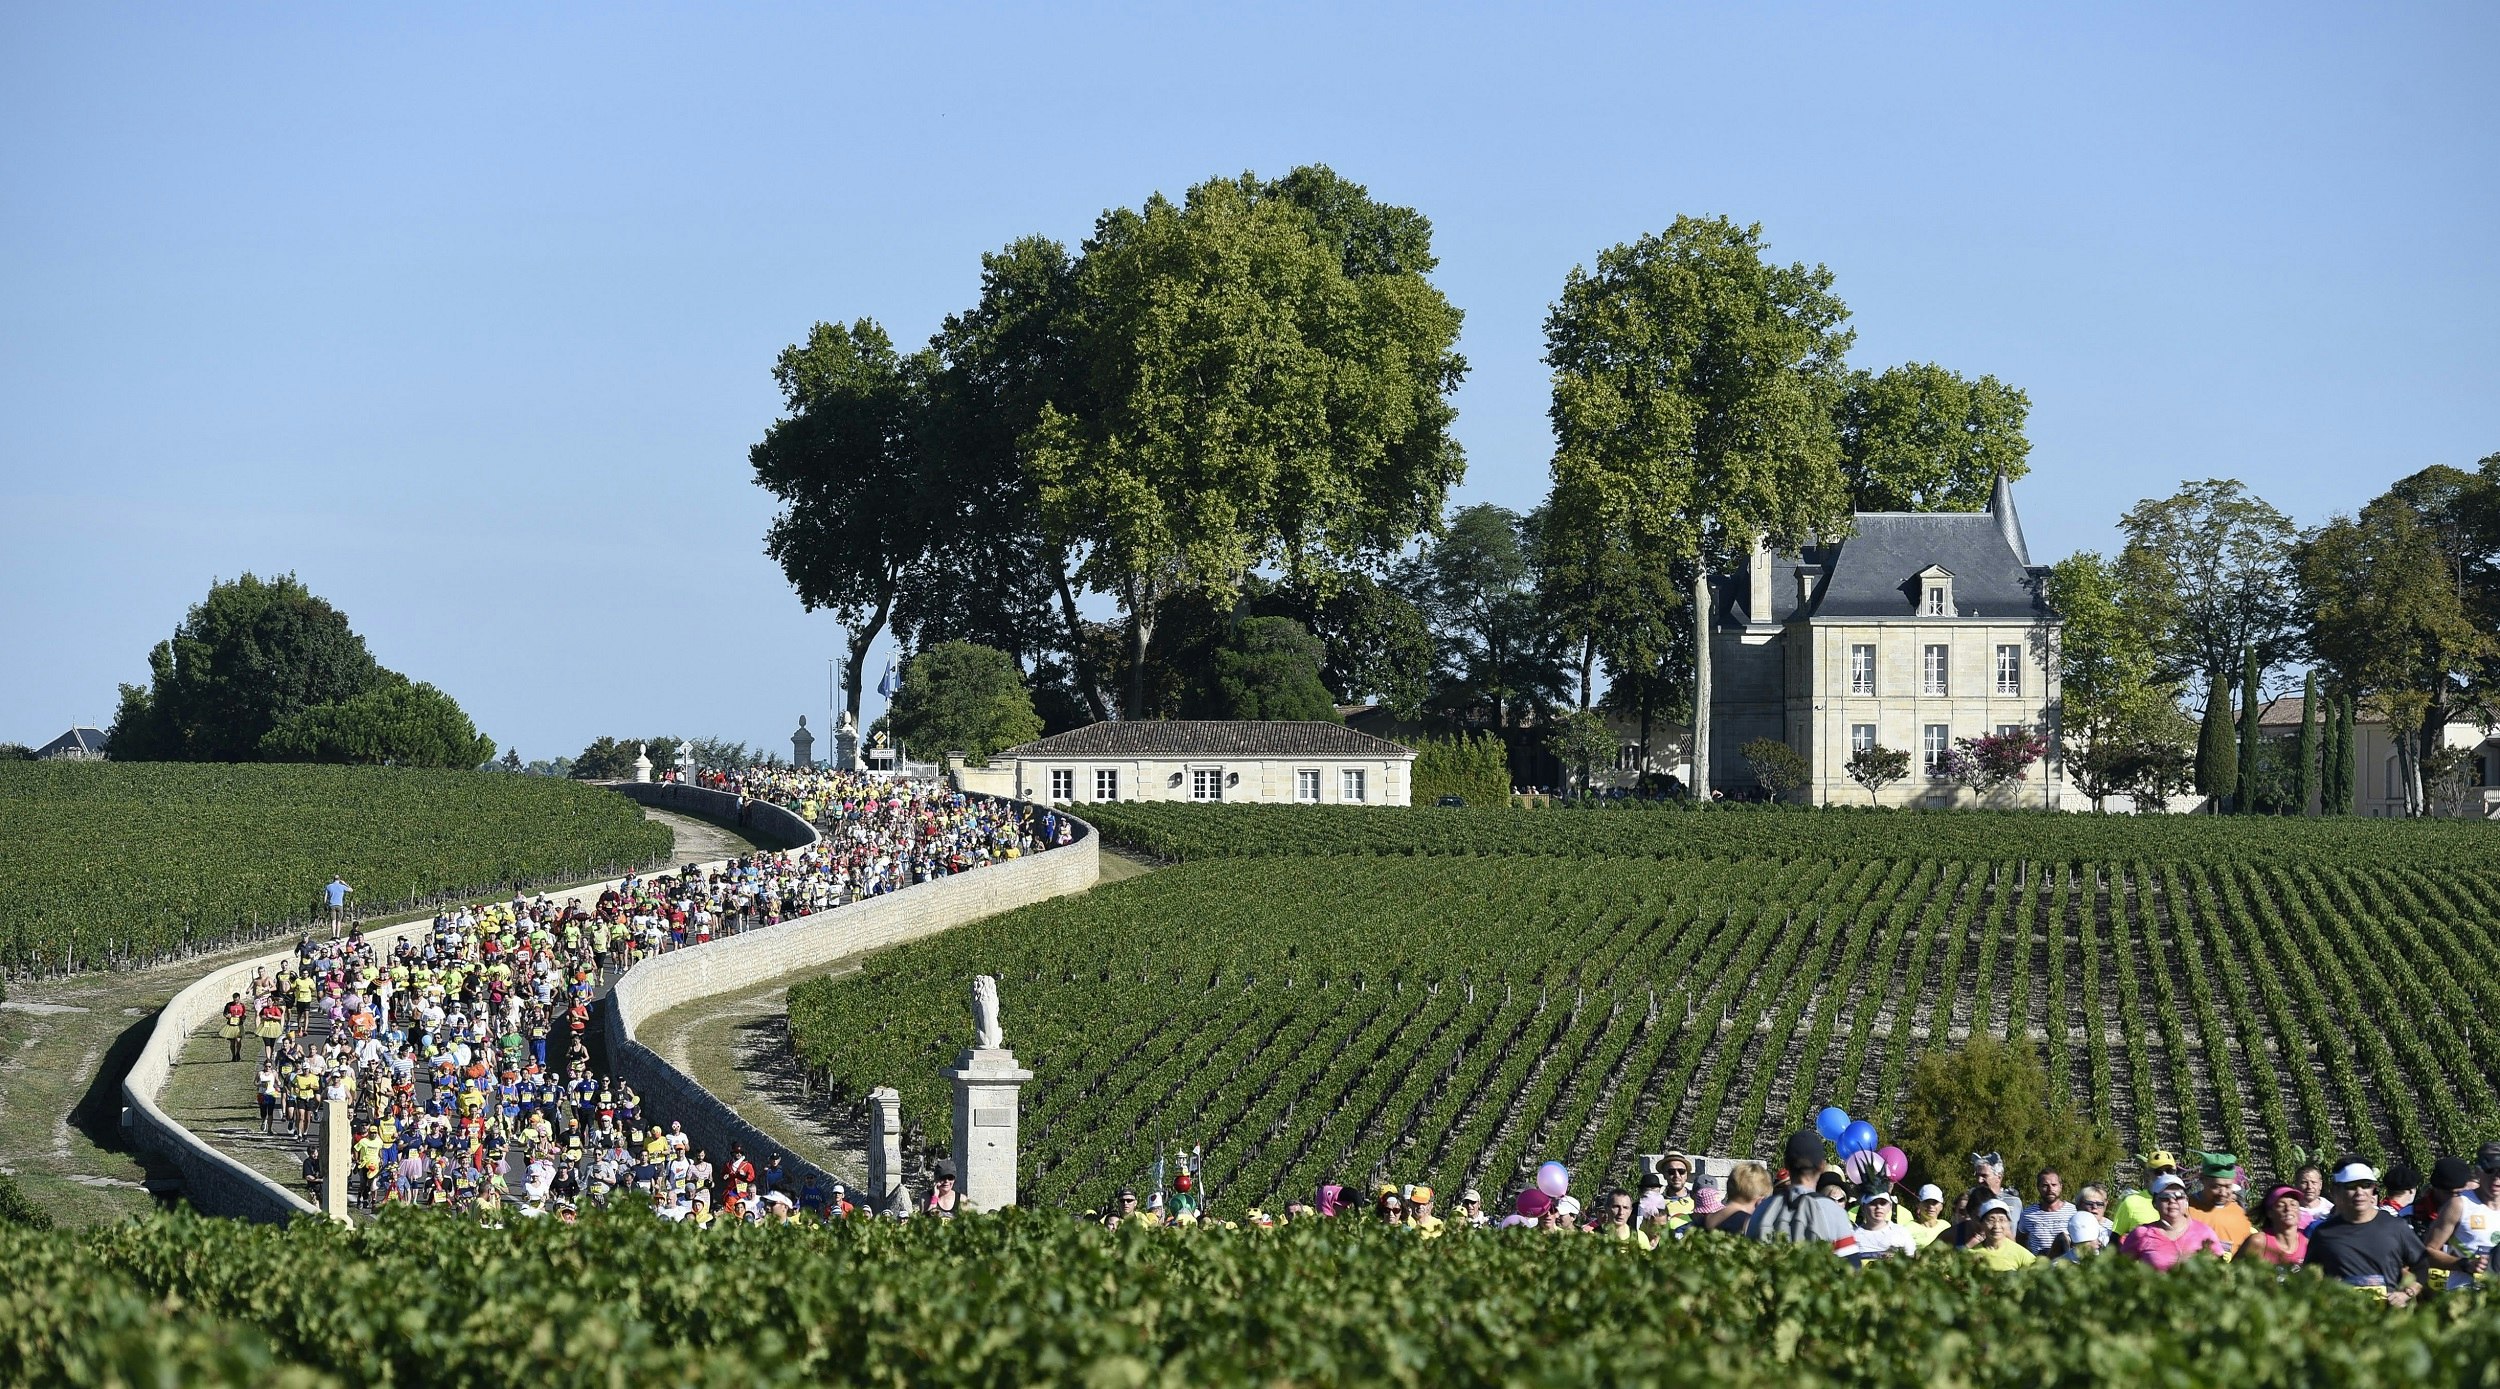 Thousands of colourfully dressed runners in the Marathon du Médoc work their way along a curving downhill section of walled road that cuts between rows of vines.